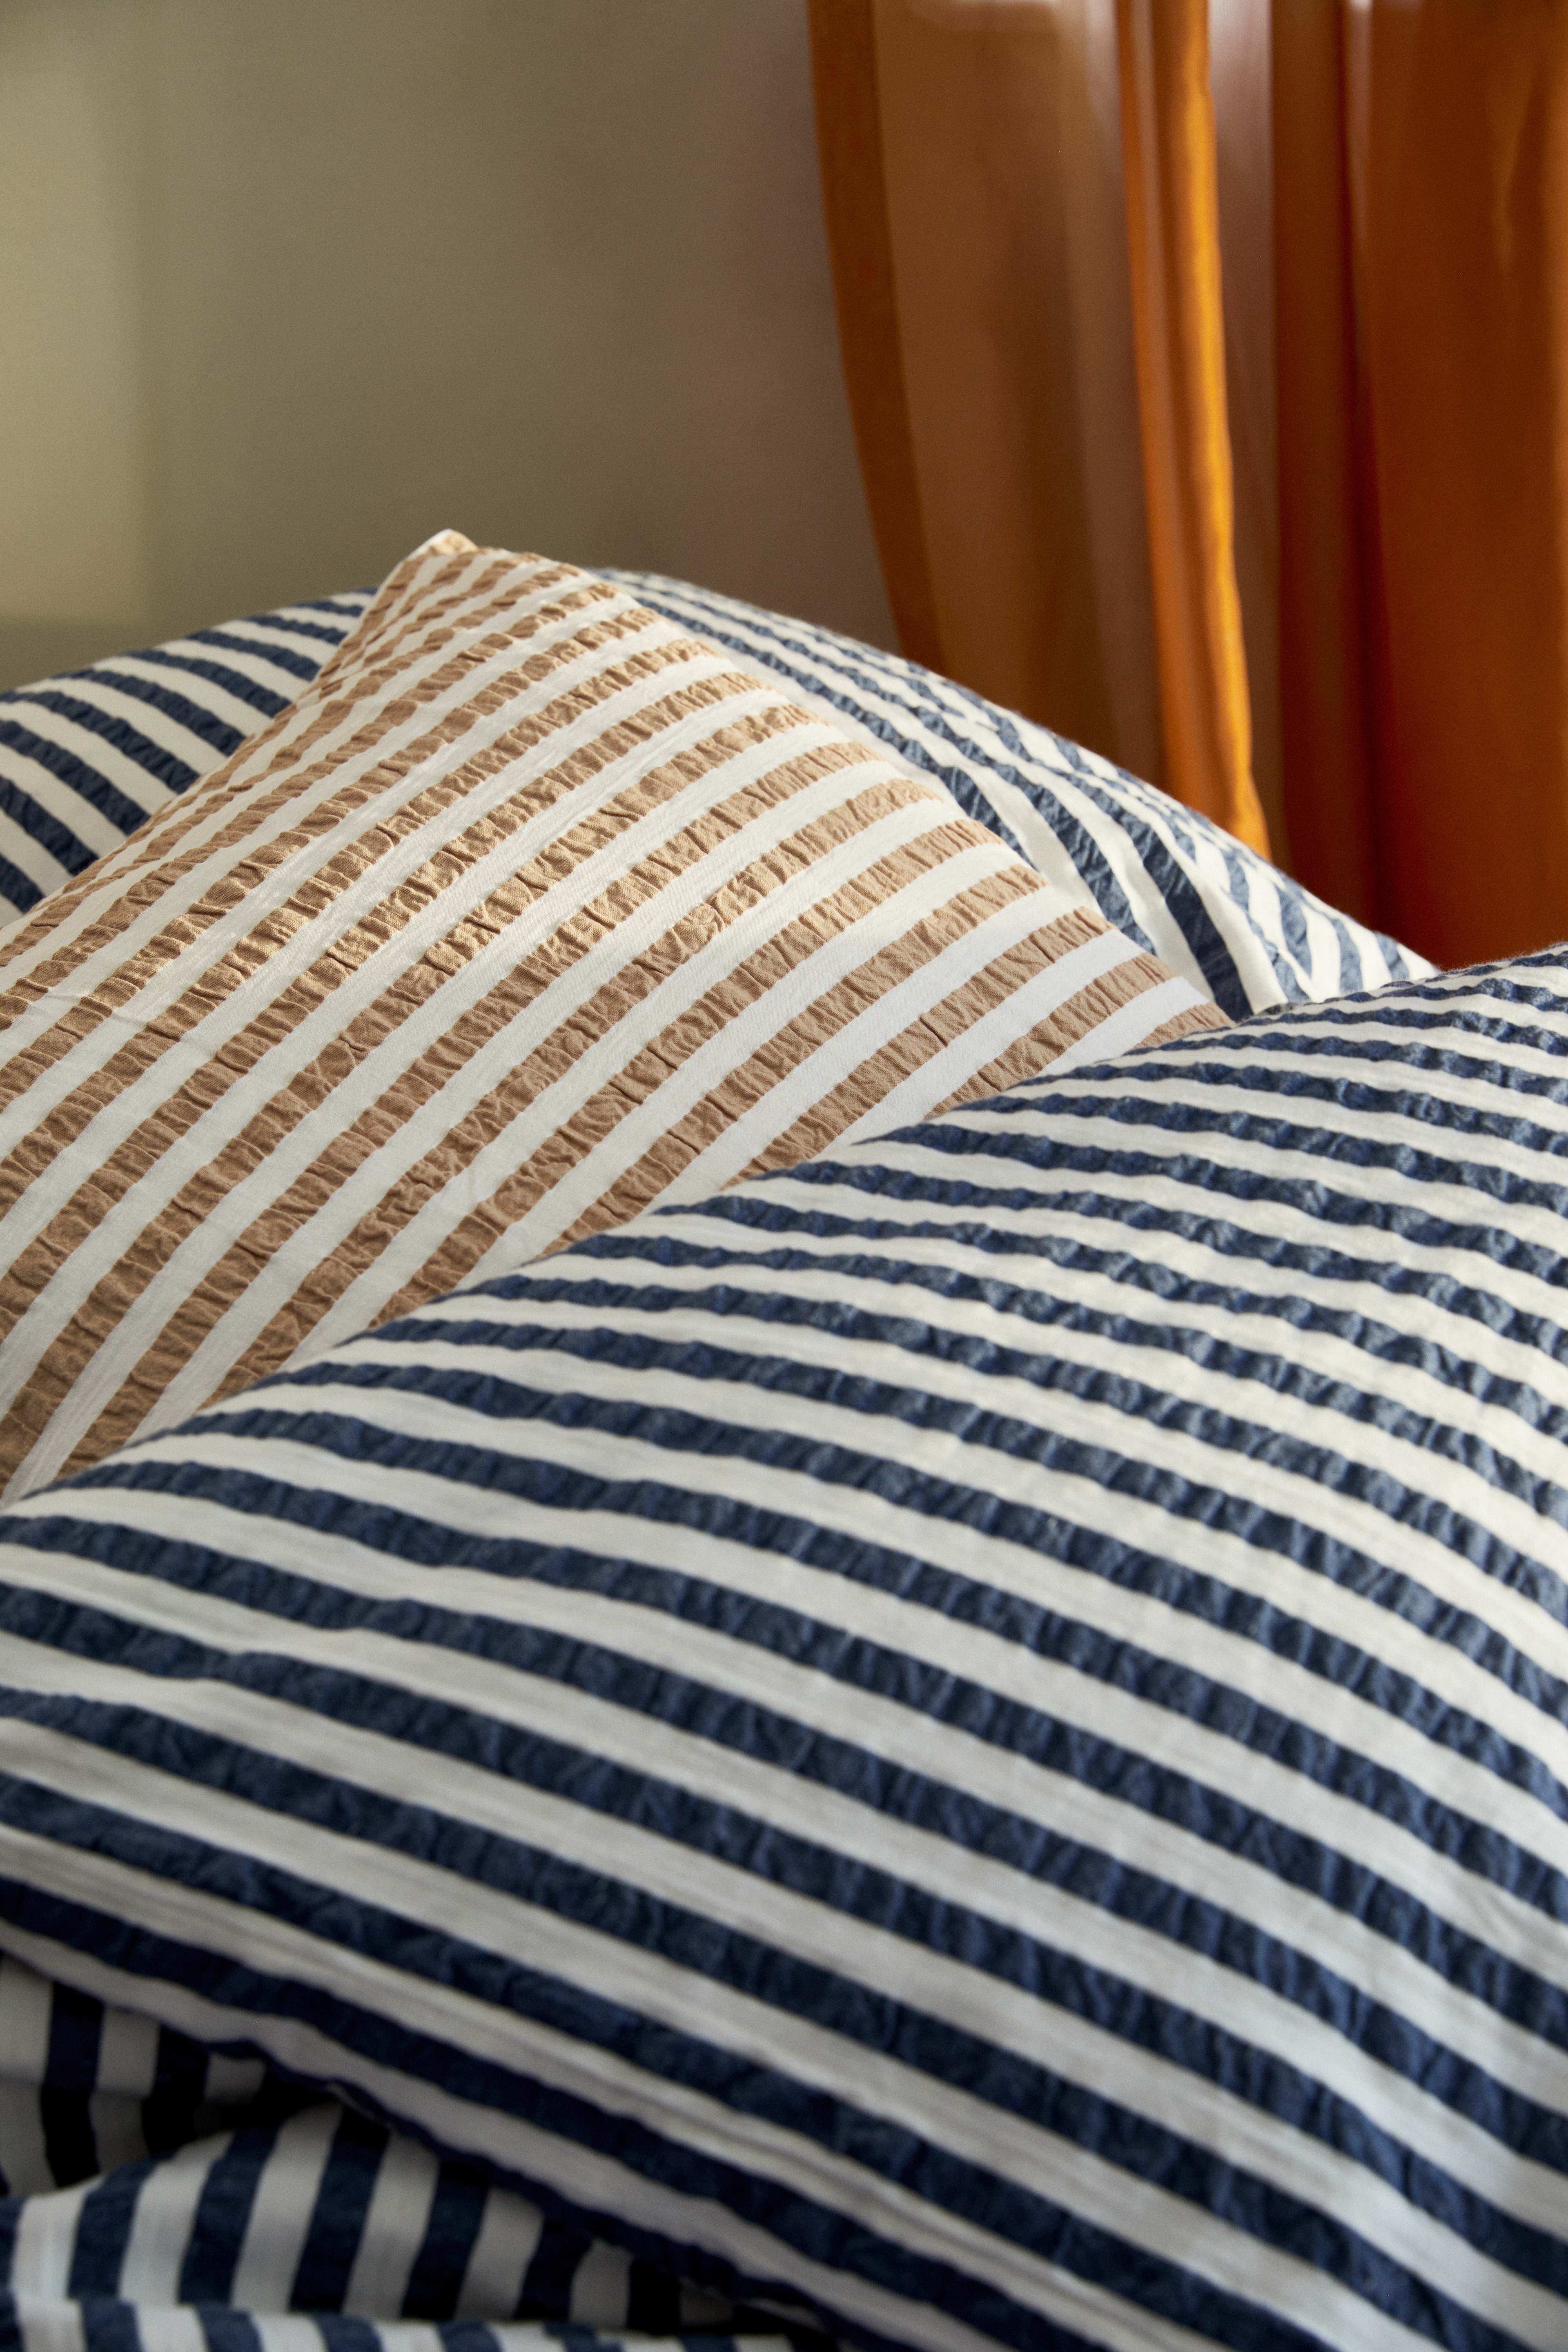 JUNA Lines bed linen from B&B series. Striped bed linen in blue and yellow